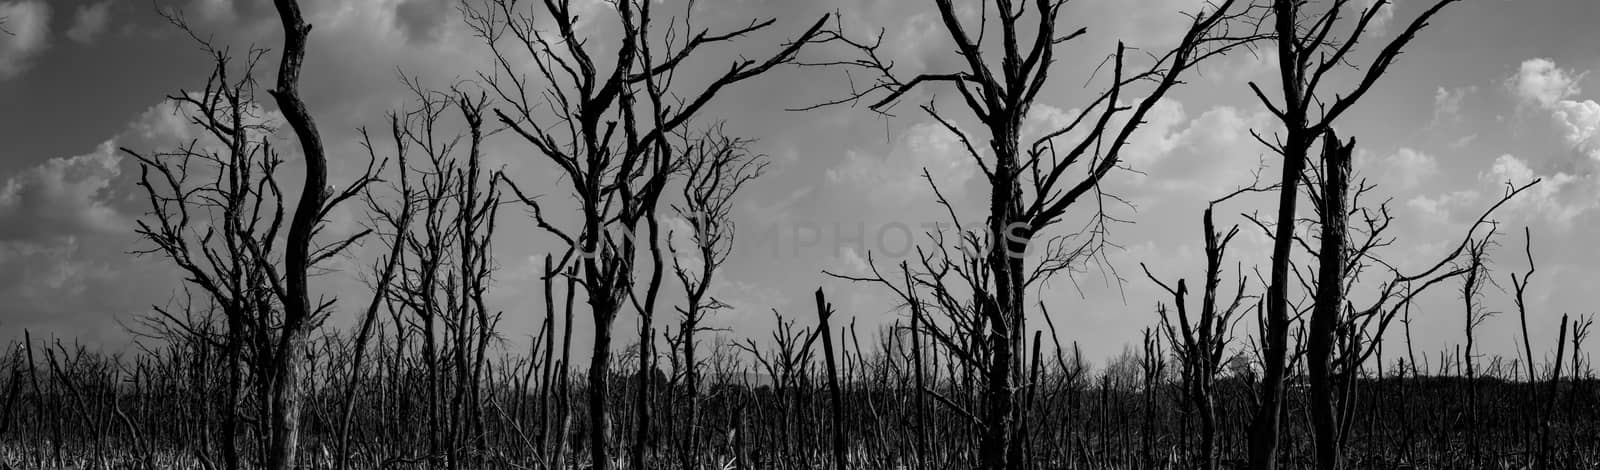 Silhouette dead tree  on dark dramatic sky background for scary  by Fahroni